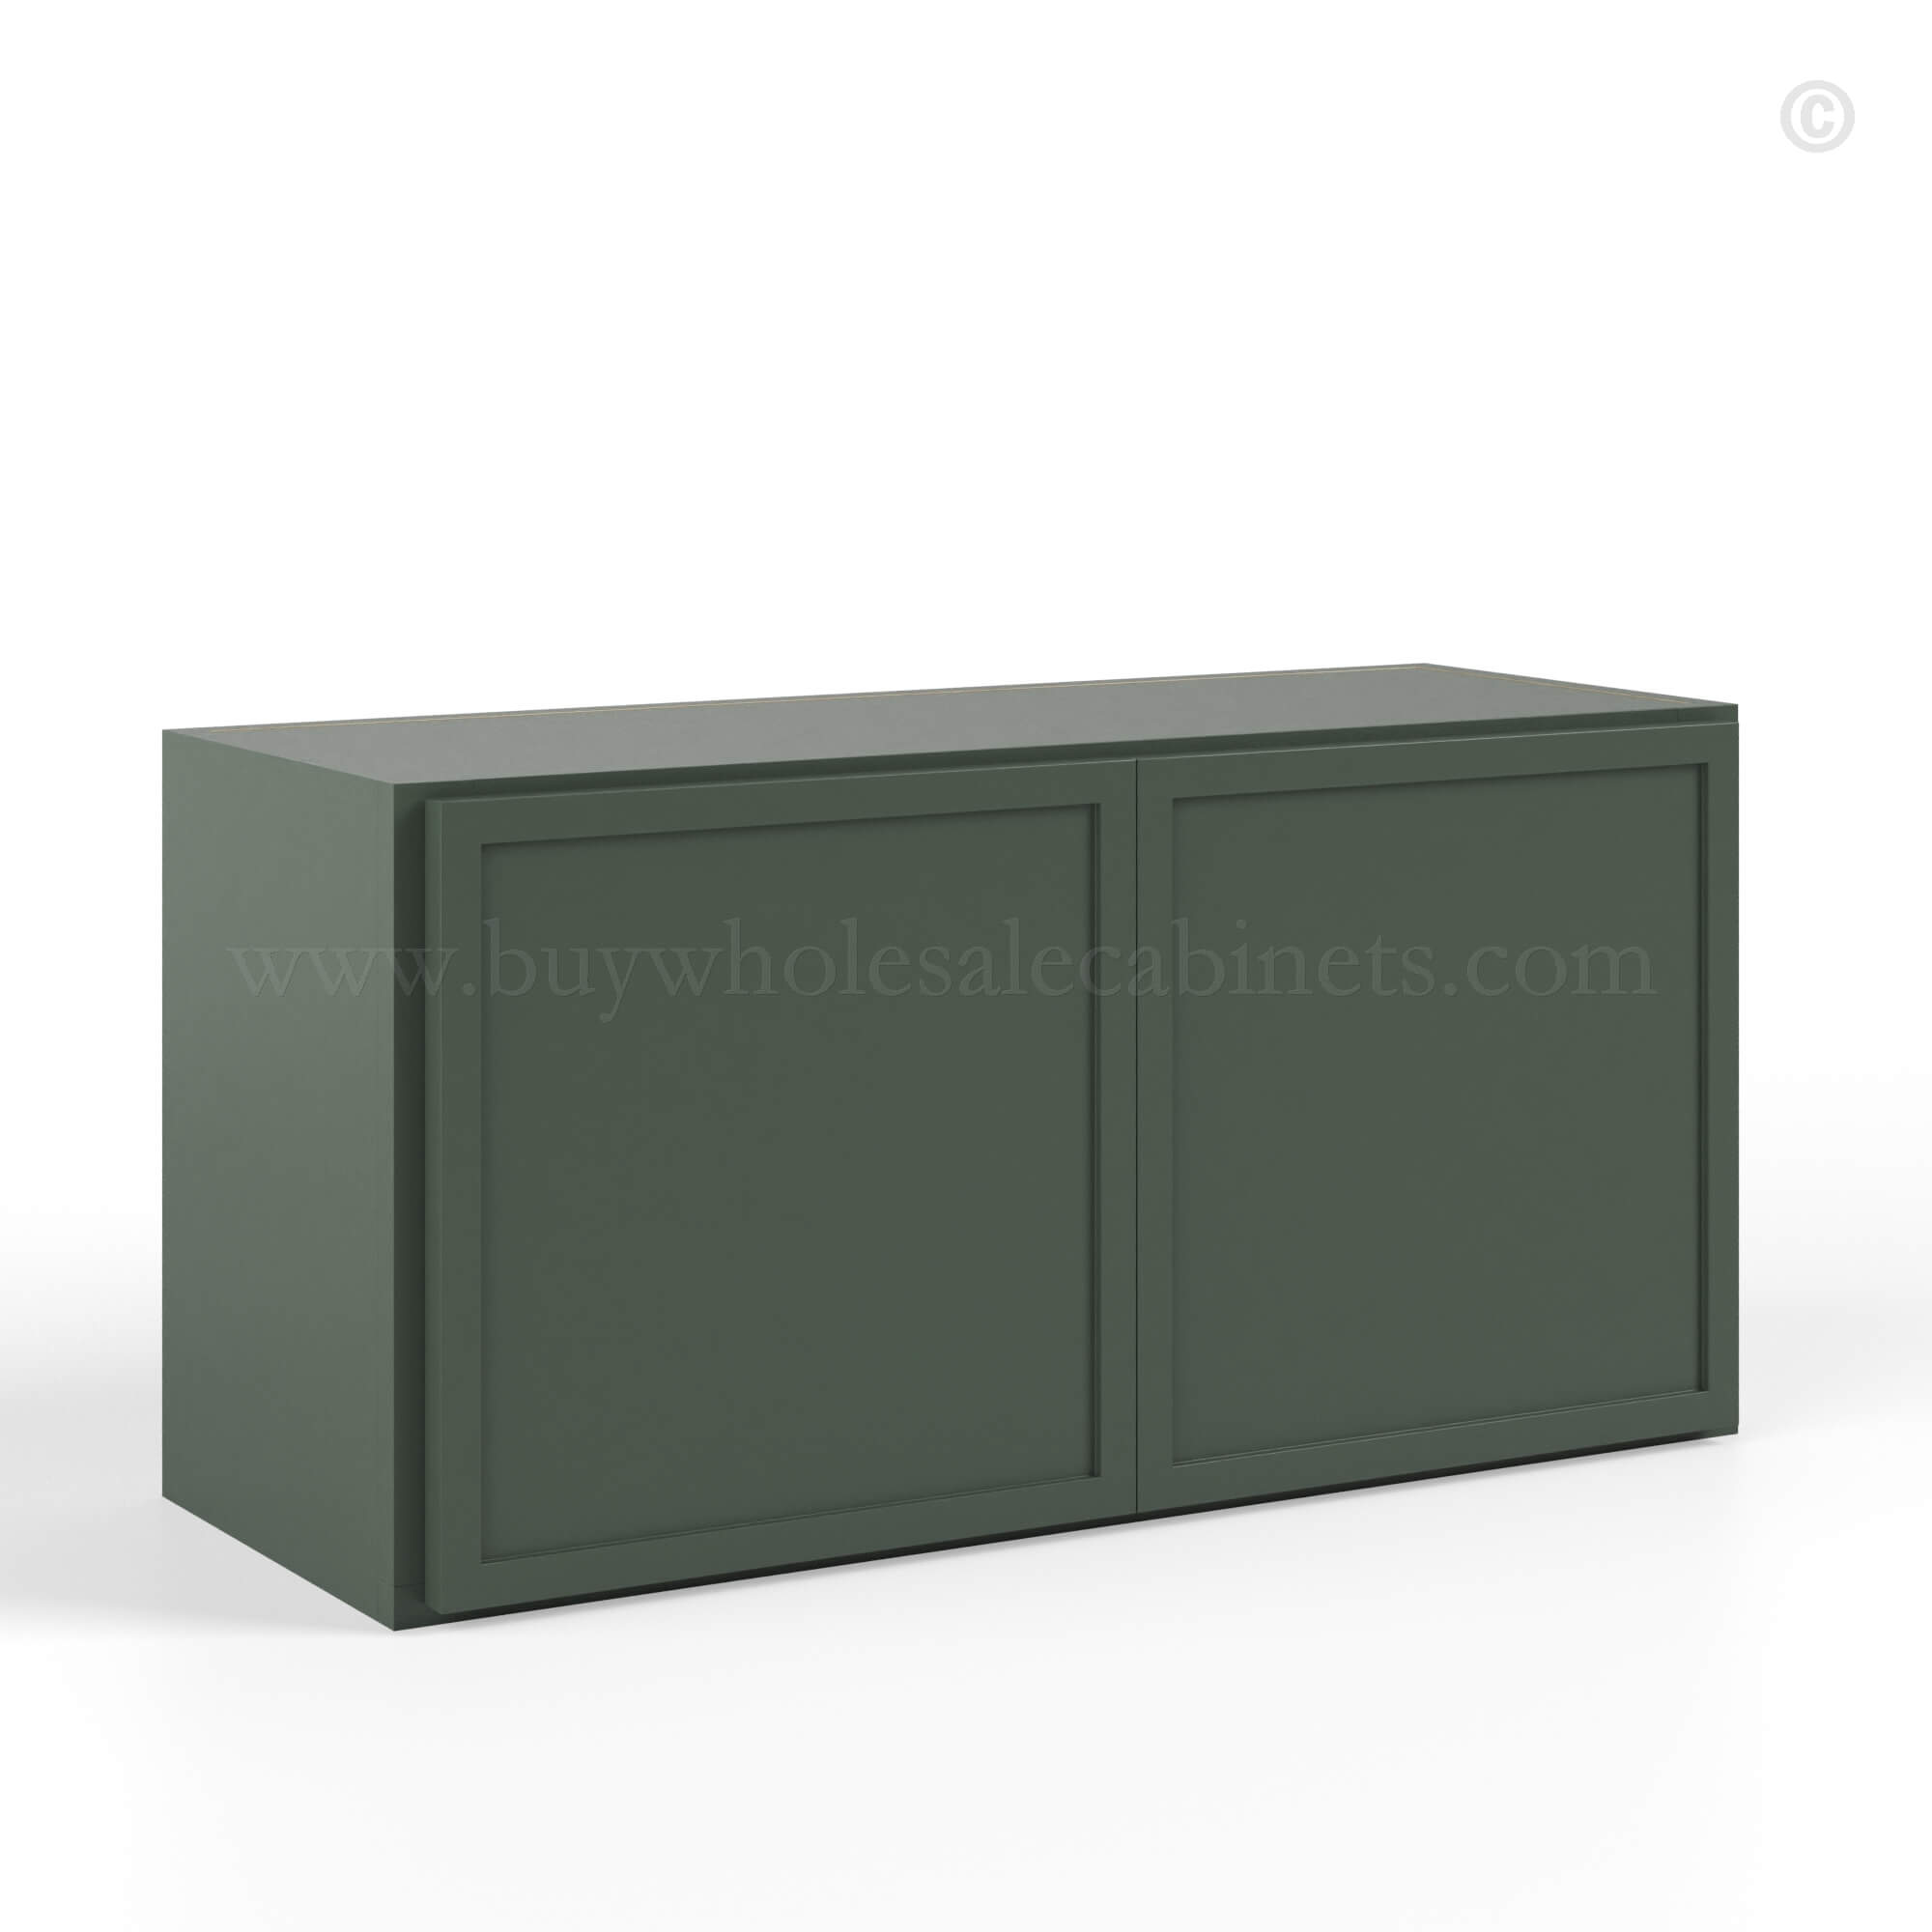 Slim Shaker Green Double Door Wall Cabinets 15″H, rta cabinets, wholesale cabinets